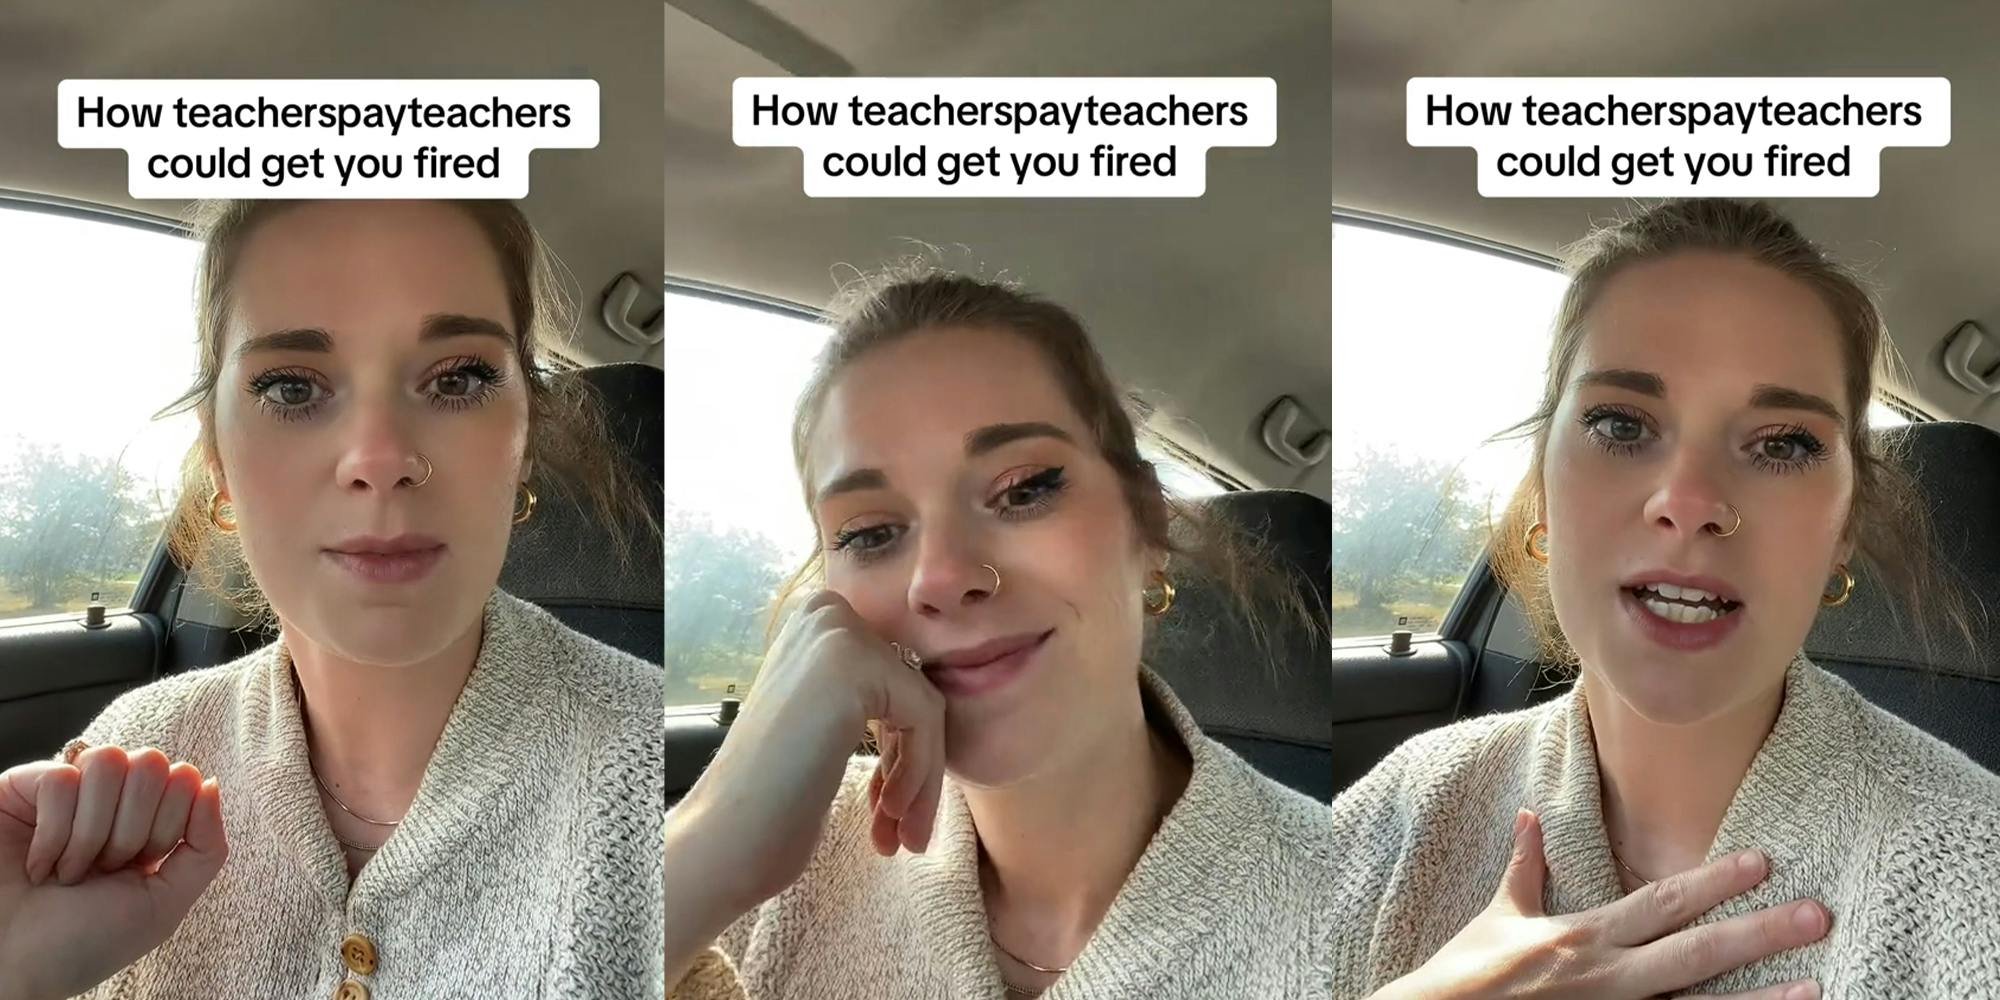 'Anything I create… is basically owned by the school': Teacher Says She Could Get Fired for Using Resale App for Education Resources Teachers Pay Teachers